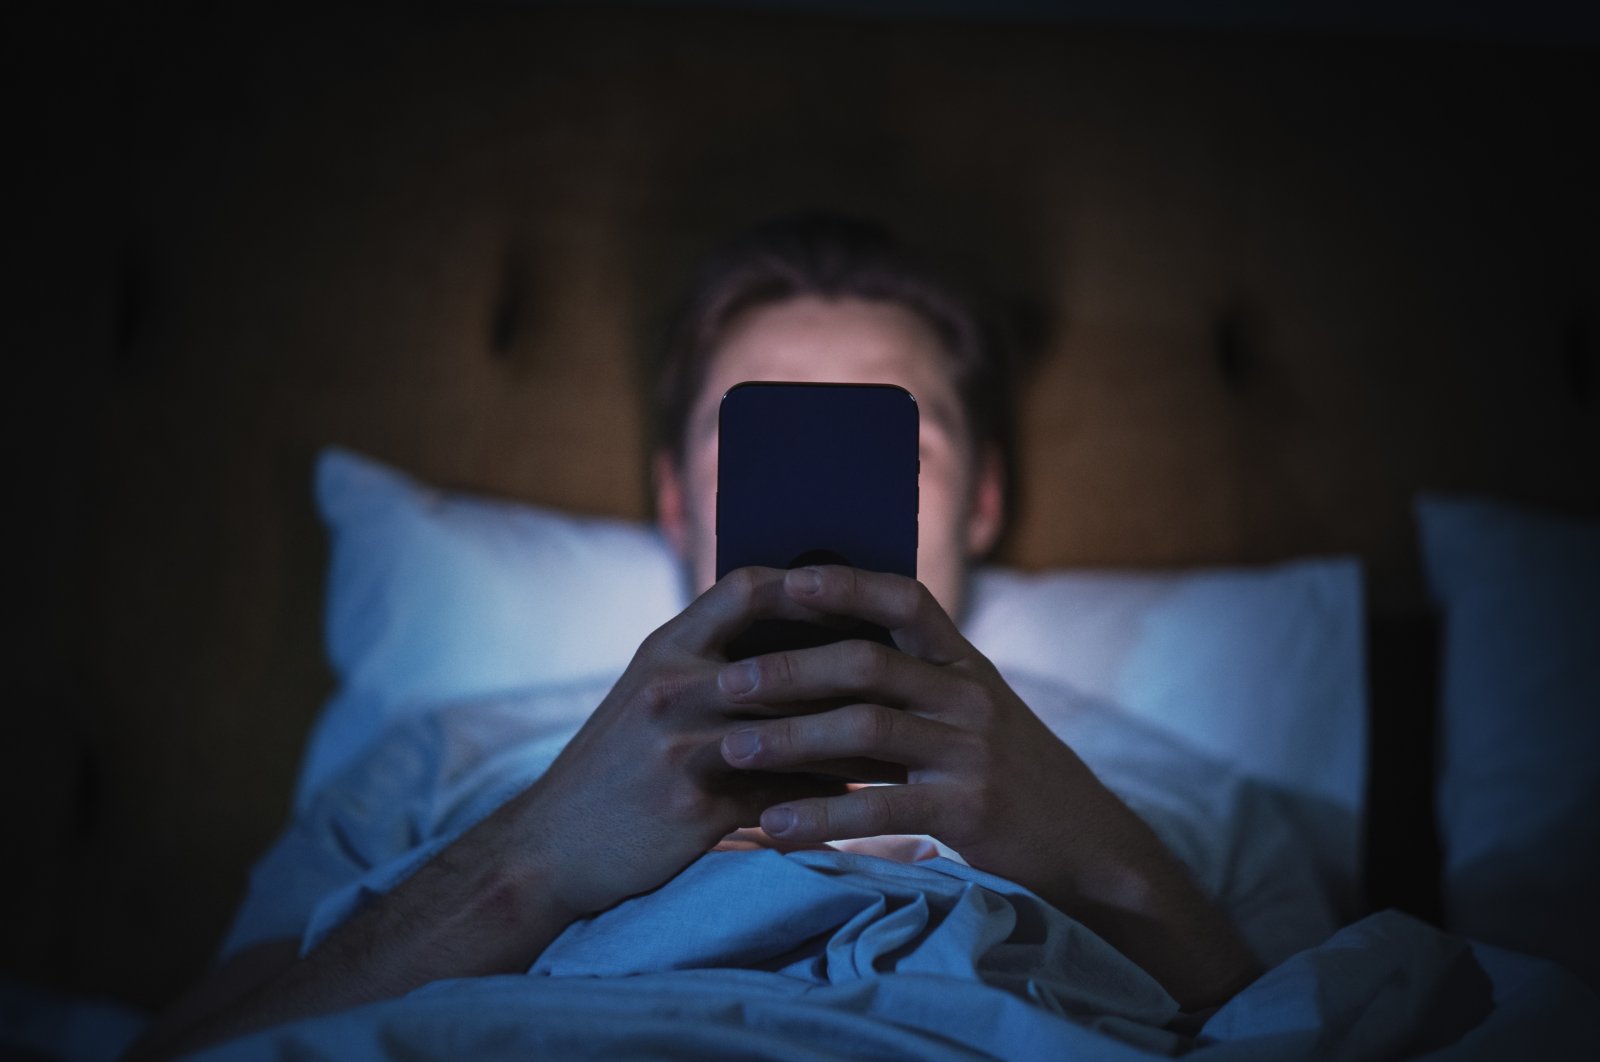 Minimize tempting notifications by putting the phone on do not disturb, which can be adjusted to allow calls and messages from certain people. (Shutterstock Photo)